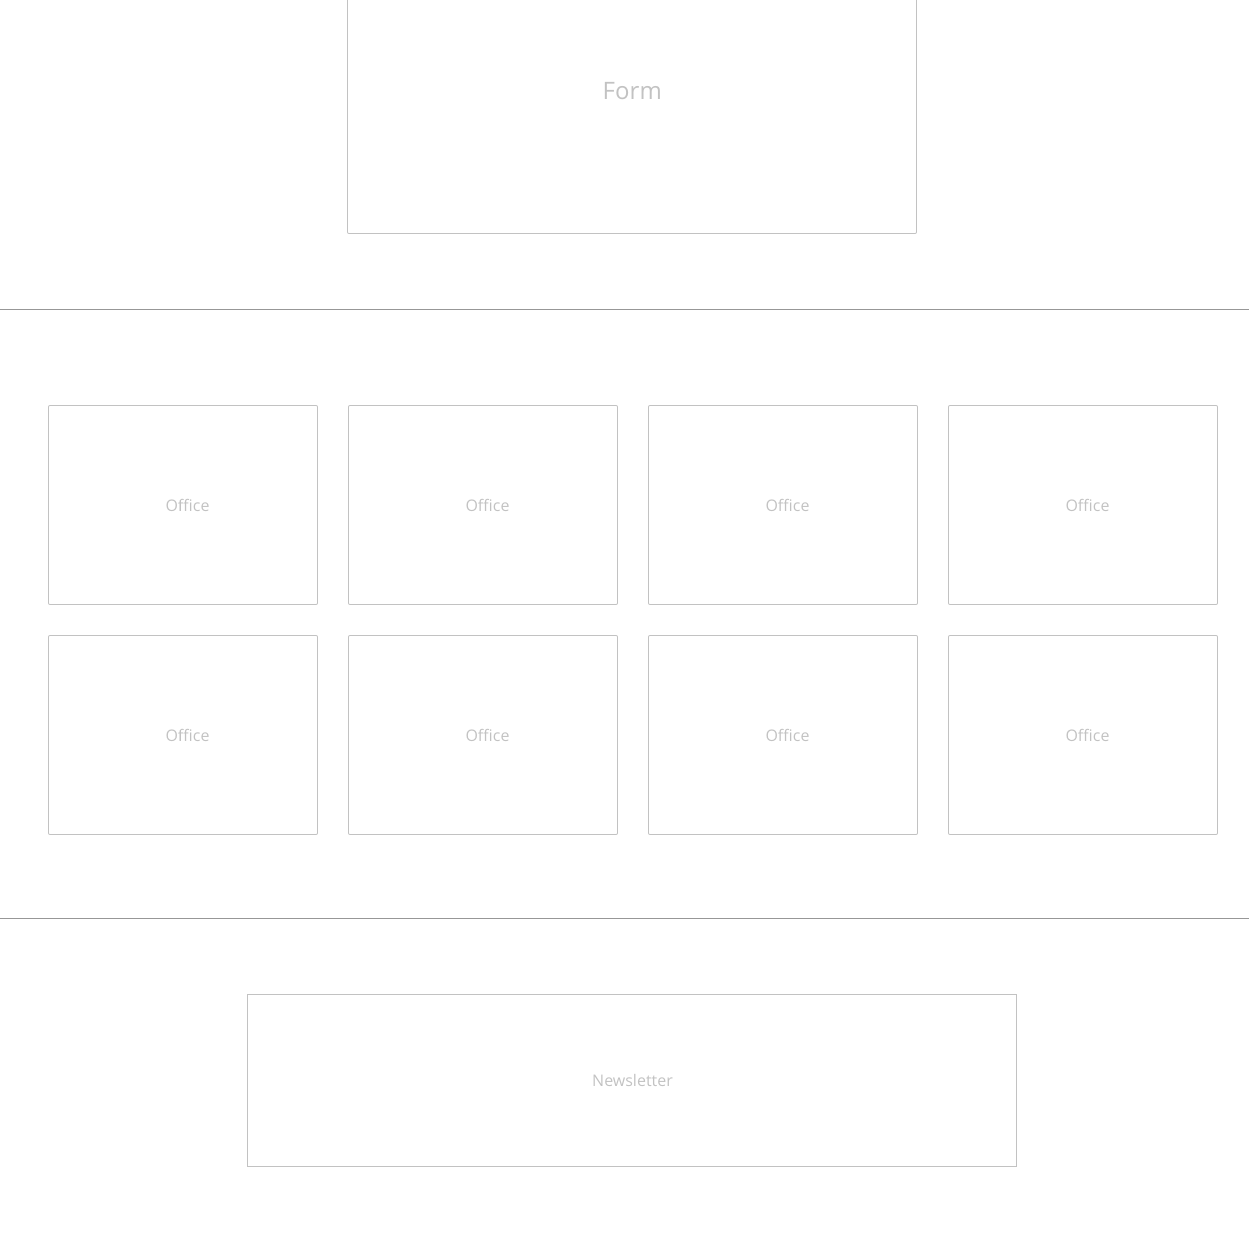 Example of a web page wireframe.